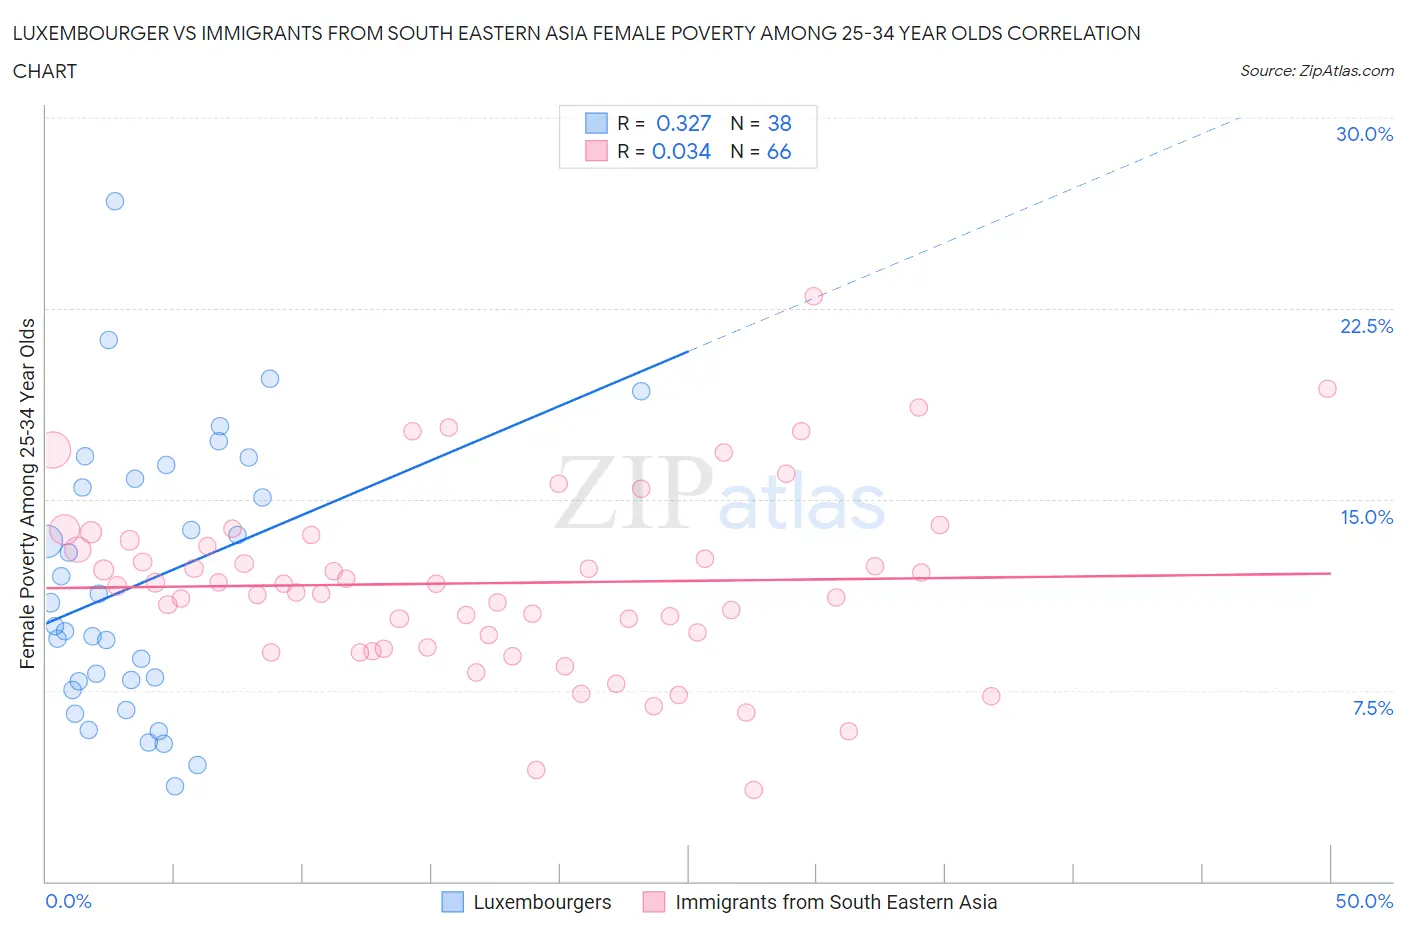 Luxembourger vs Immigrants from South Eastern Asia Female Poverty Among 25-34 Year Olds